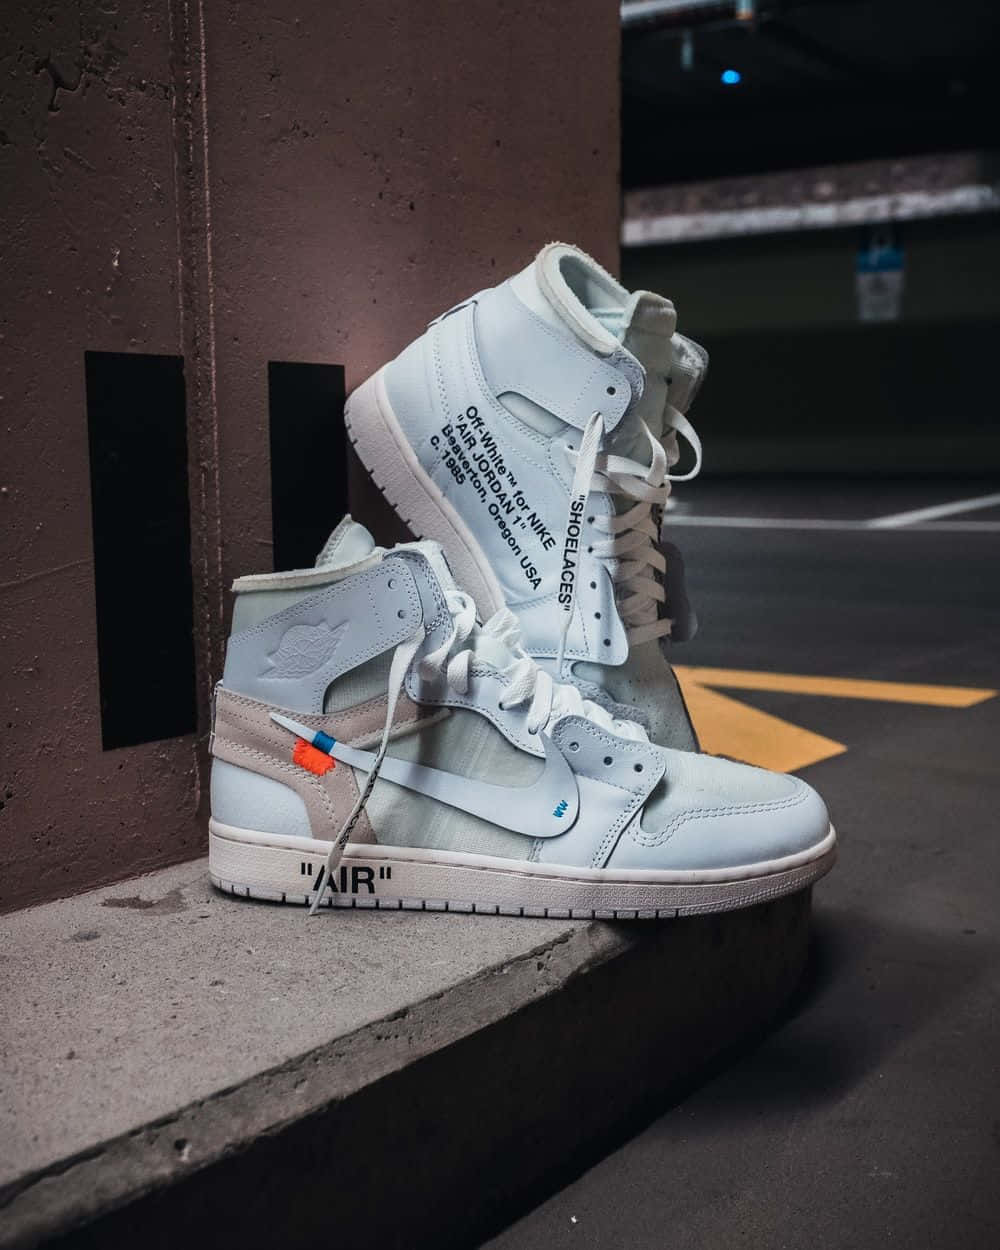 A Pair Of White Air Jordan 1 High Sneakers Sitting On A Concrete Wall Wallpaper